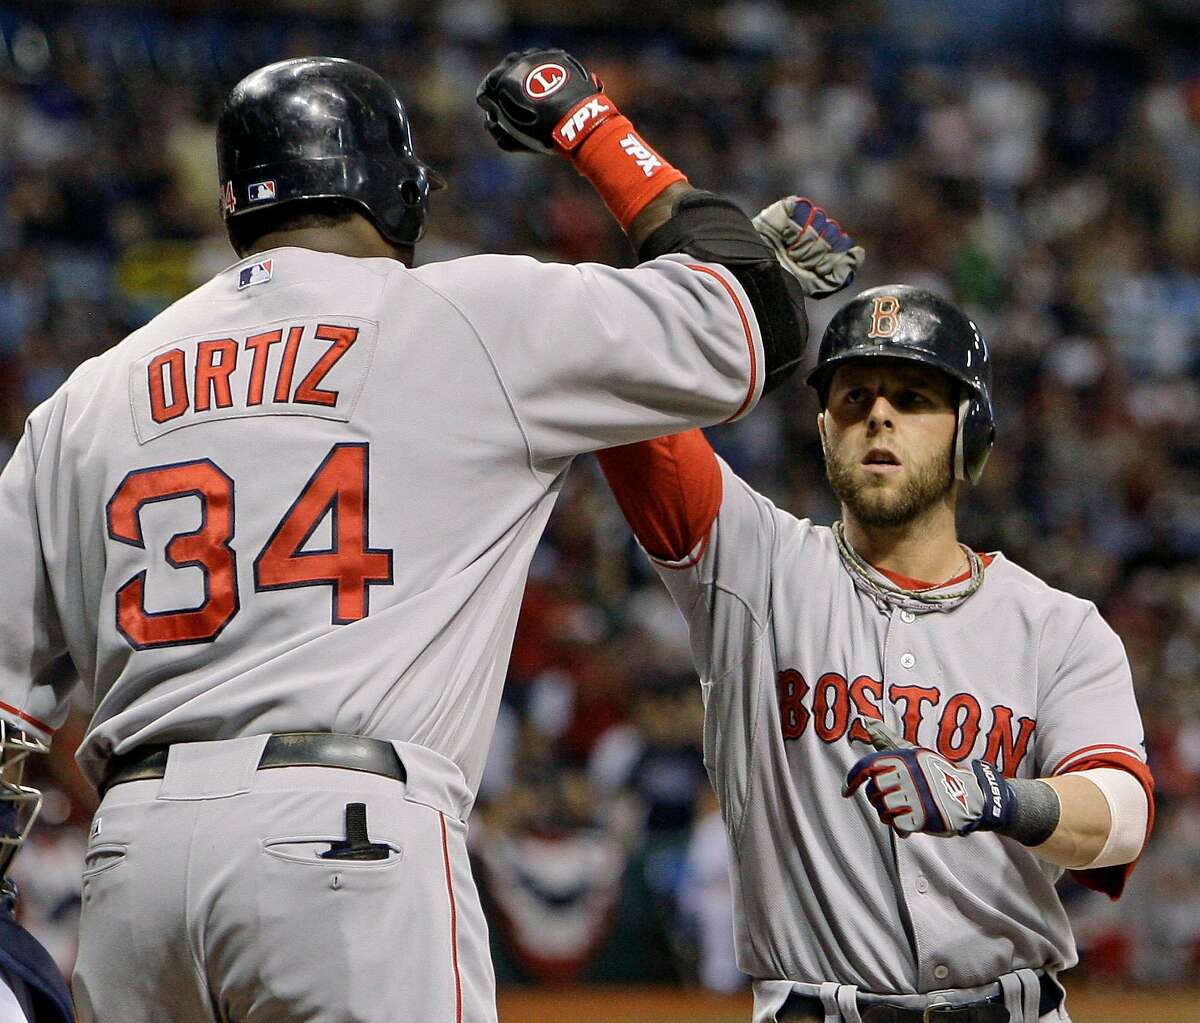 Retired Dustin Pedroia makes this elite 5-9-and-under list with